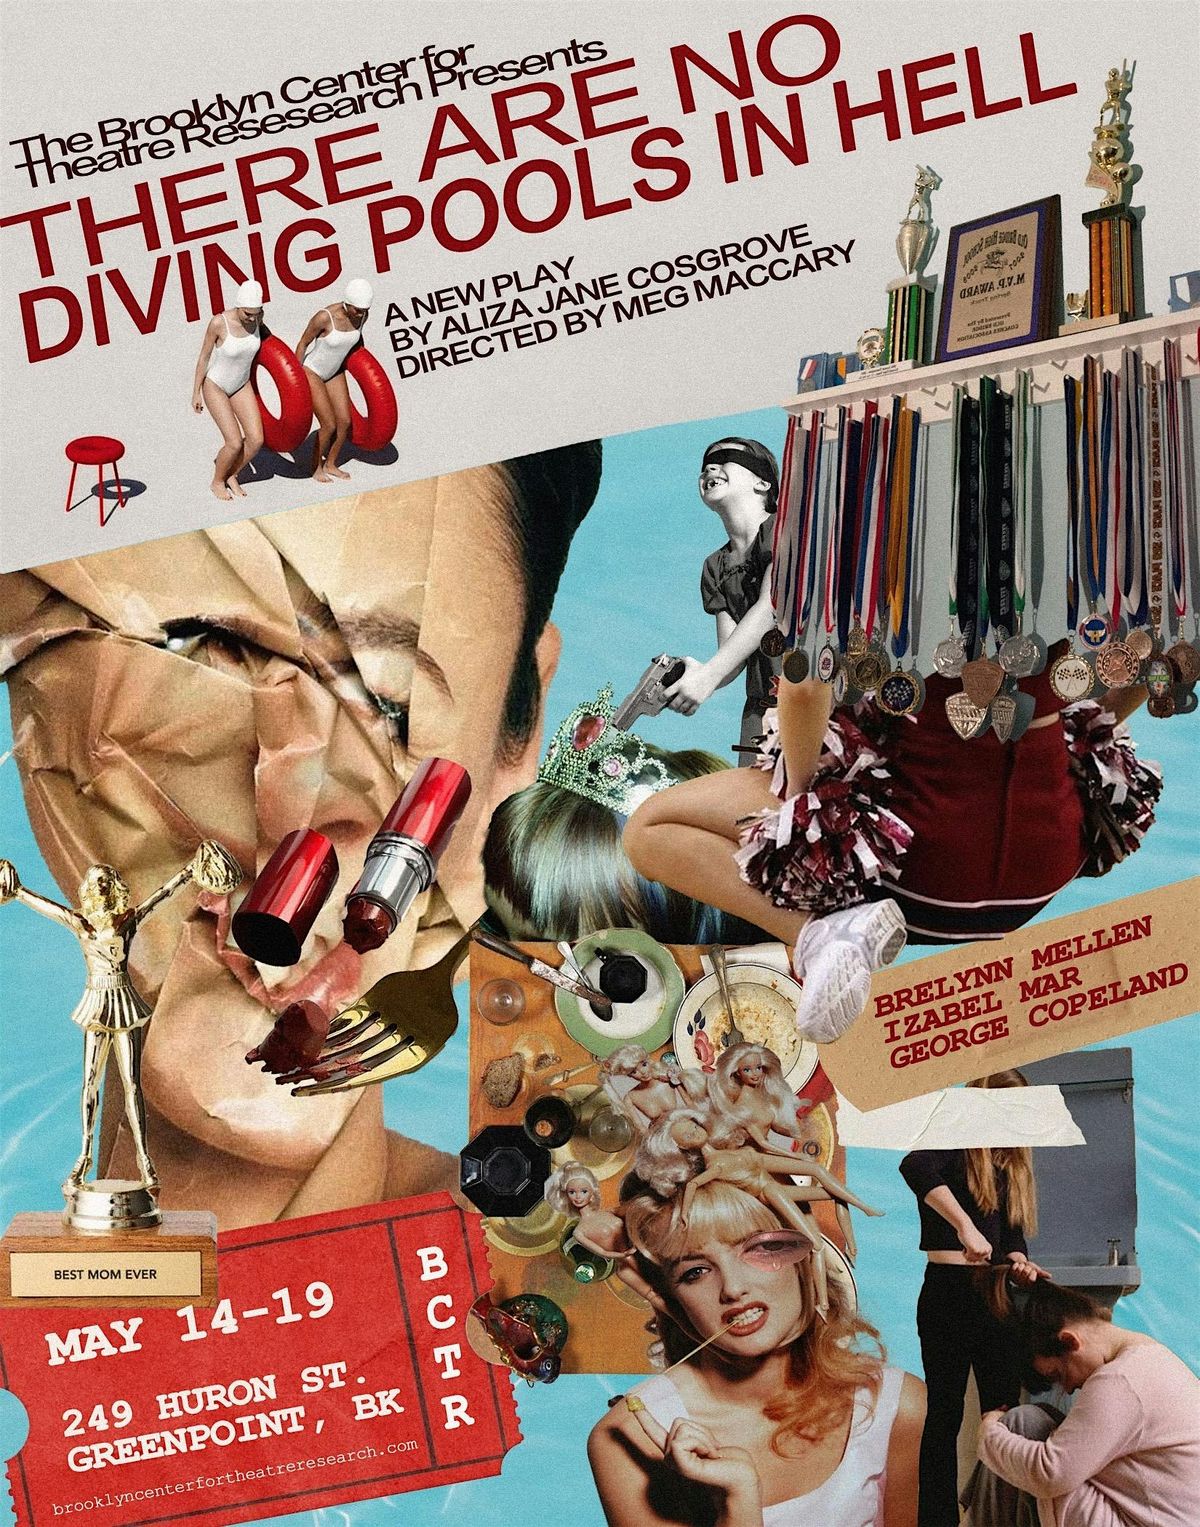 THERE ARE NO DIVING POOLS IN HELL (a new play)